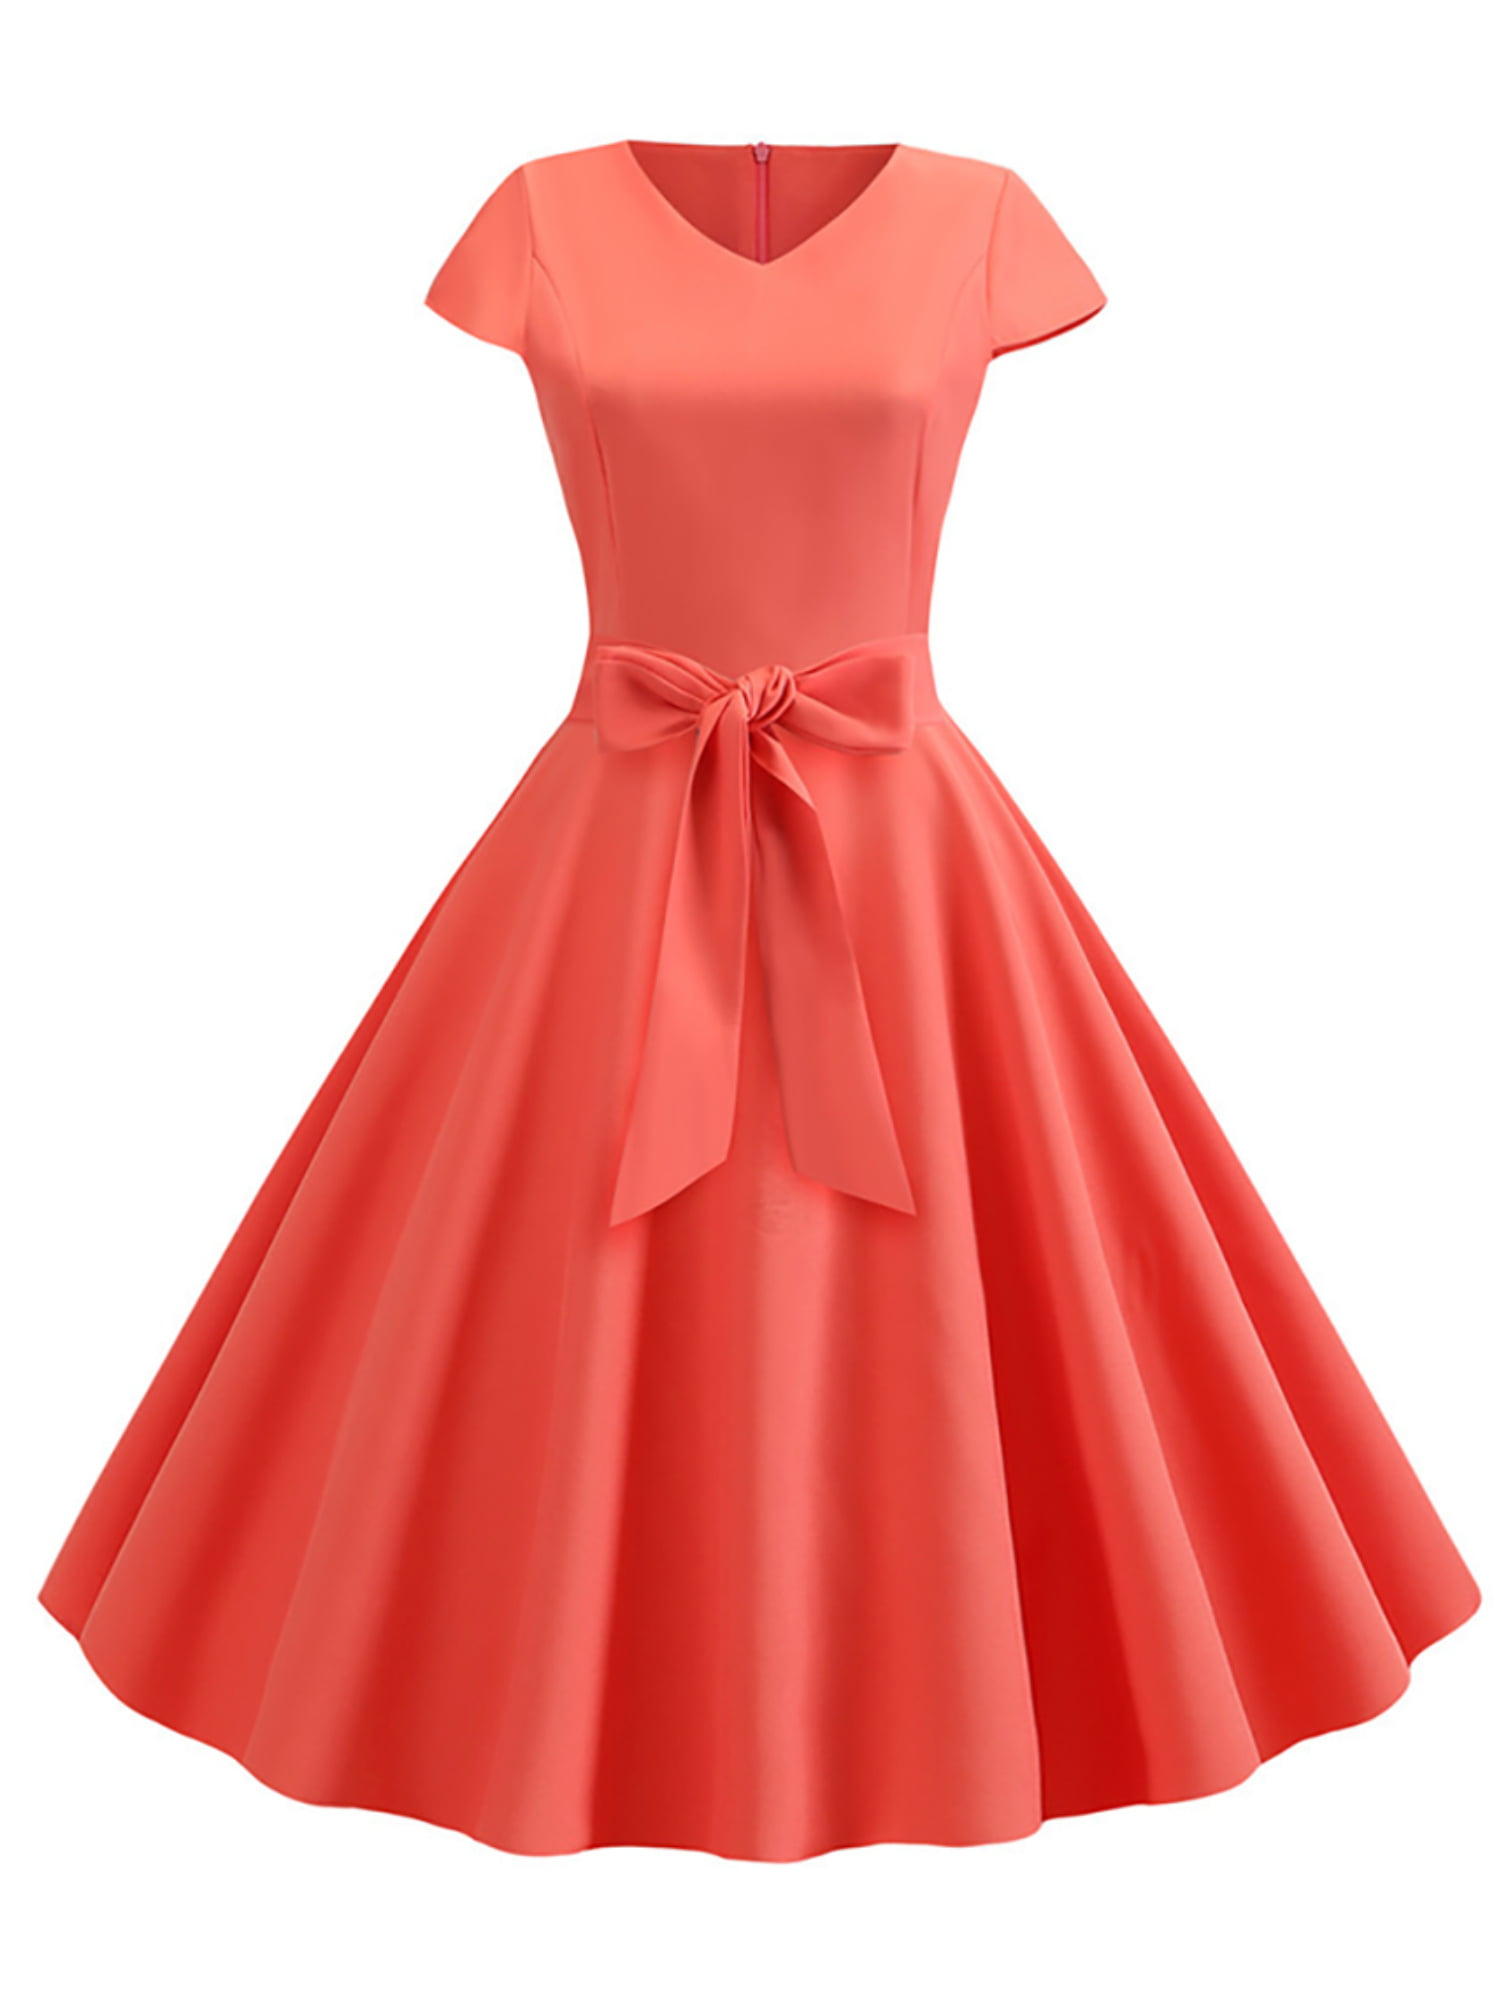 Womens Solid Vintage Bowknot 1950s 1960s Rockabilly Evening Prom Ball Gown  Swing Party Midi Dress - Walmart.com